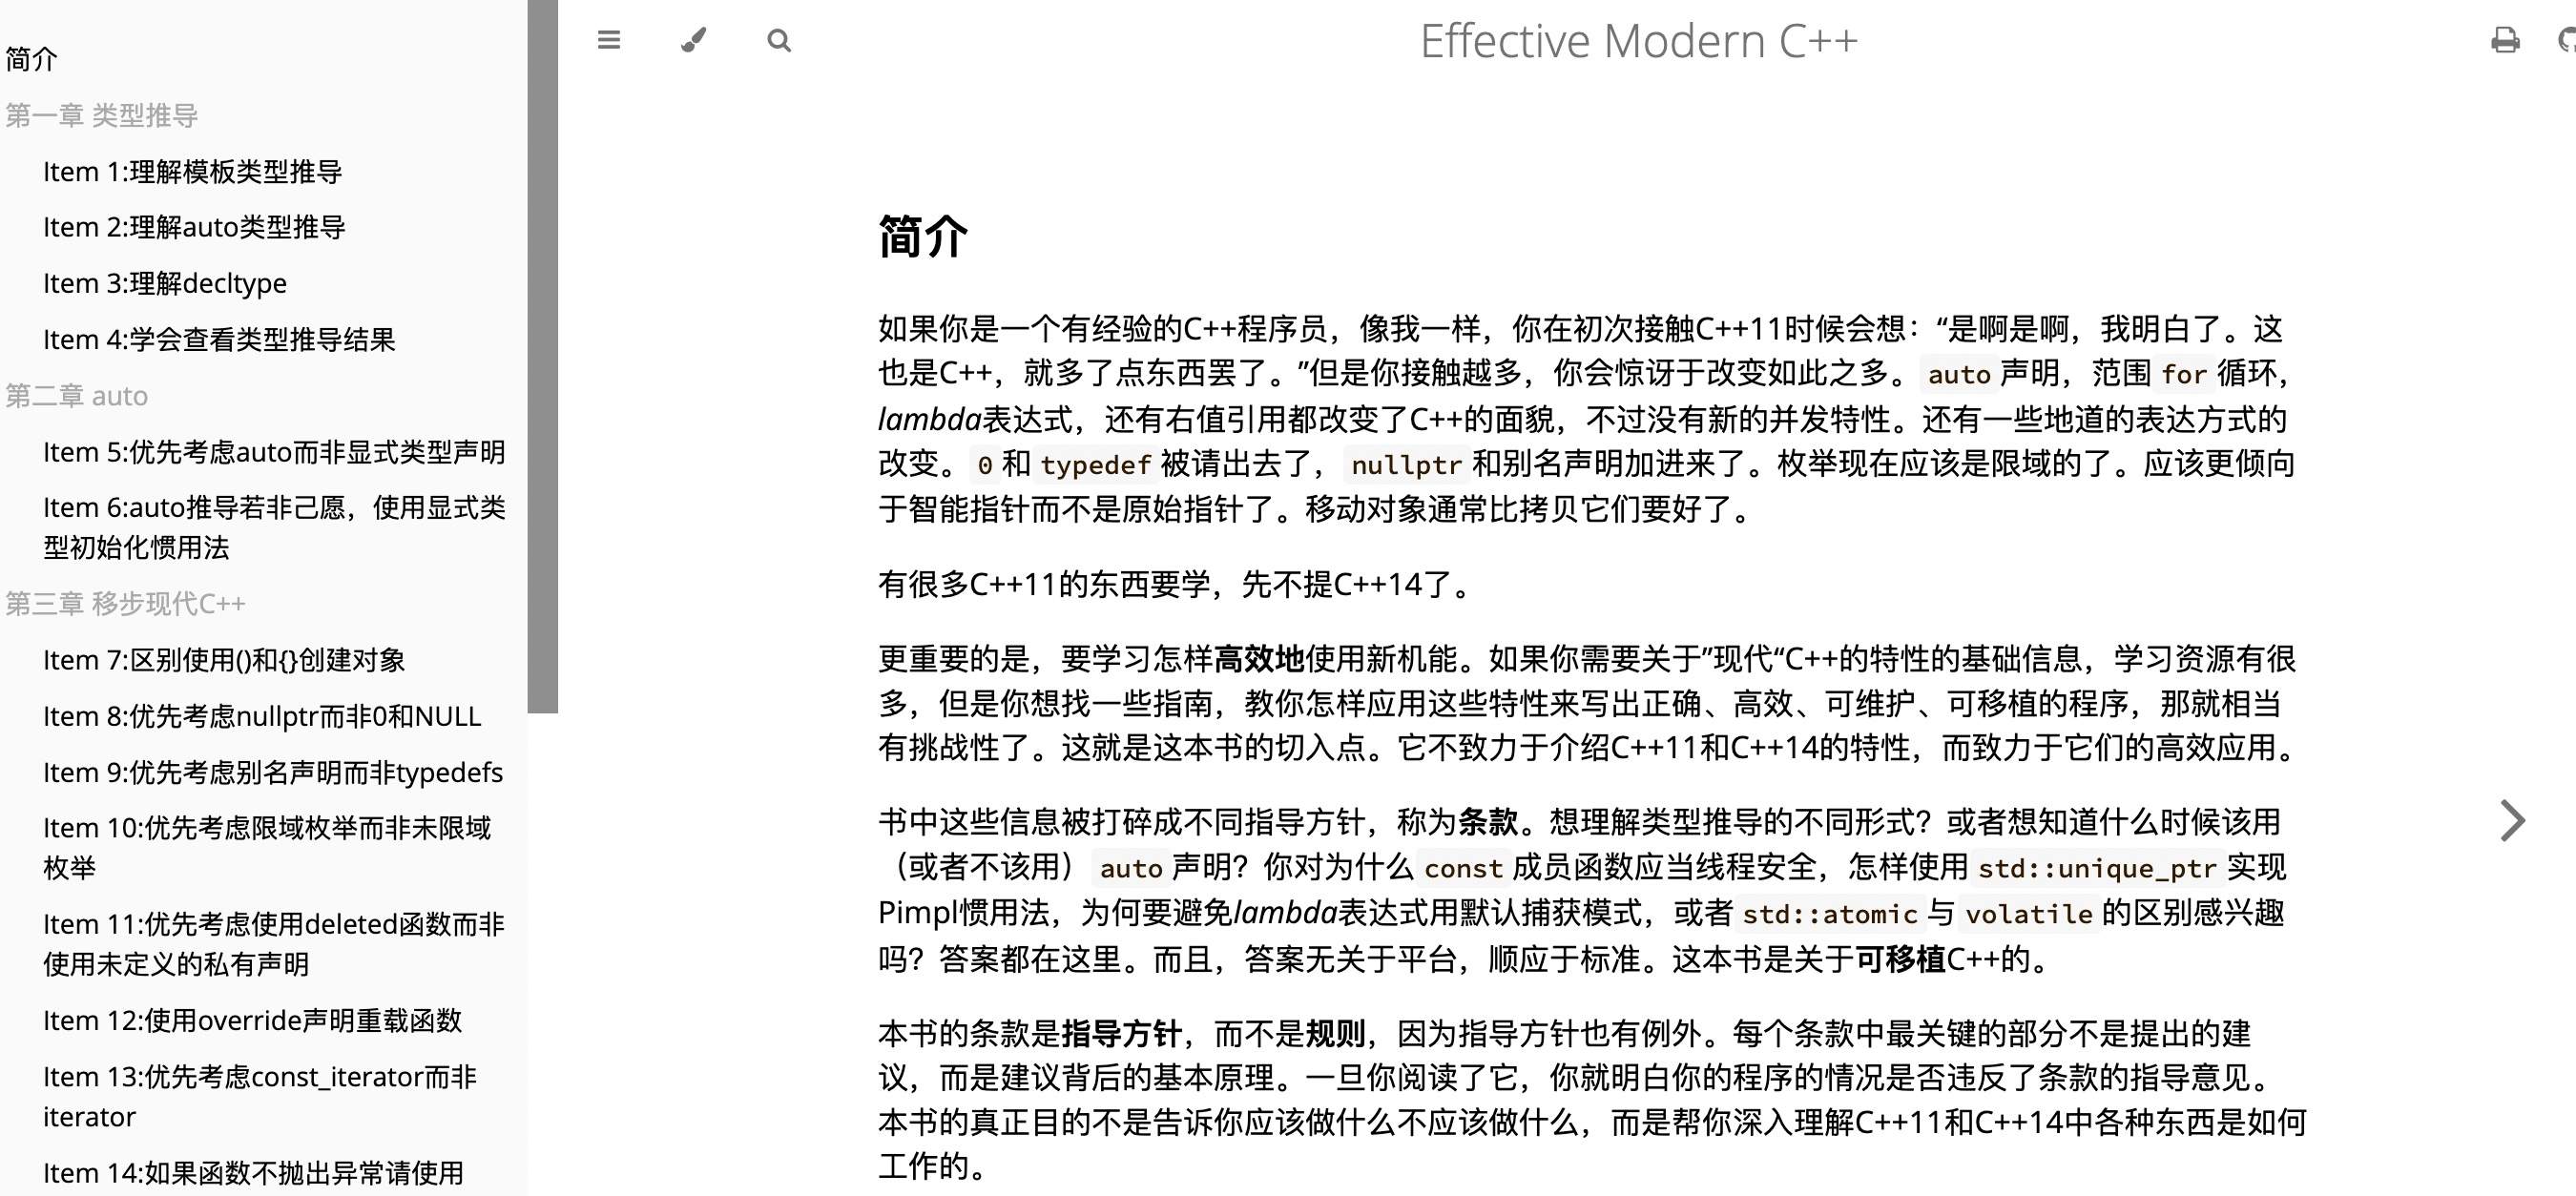 EffectiveModernCppChinese